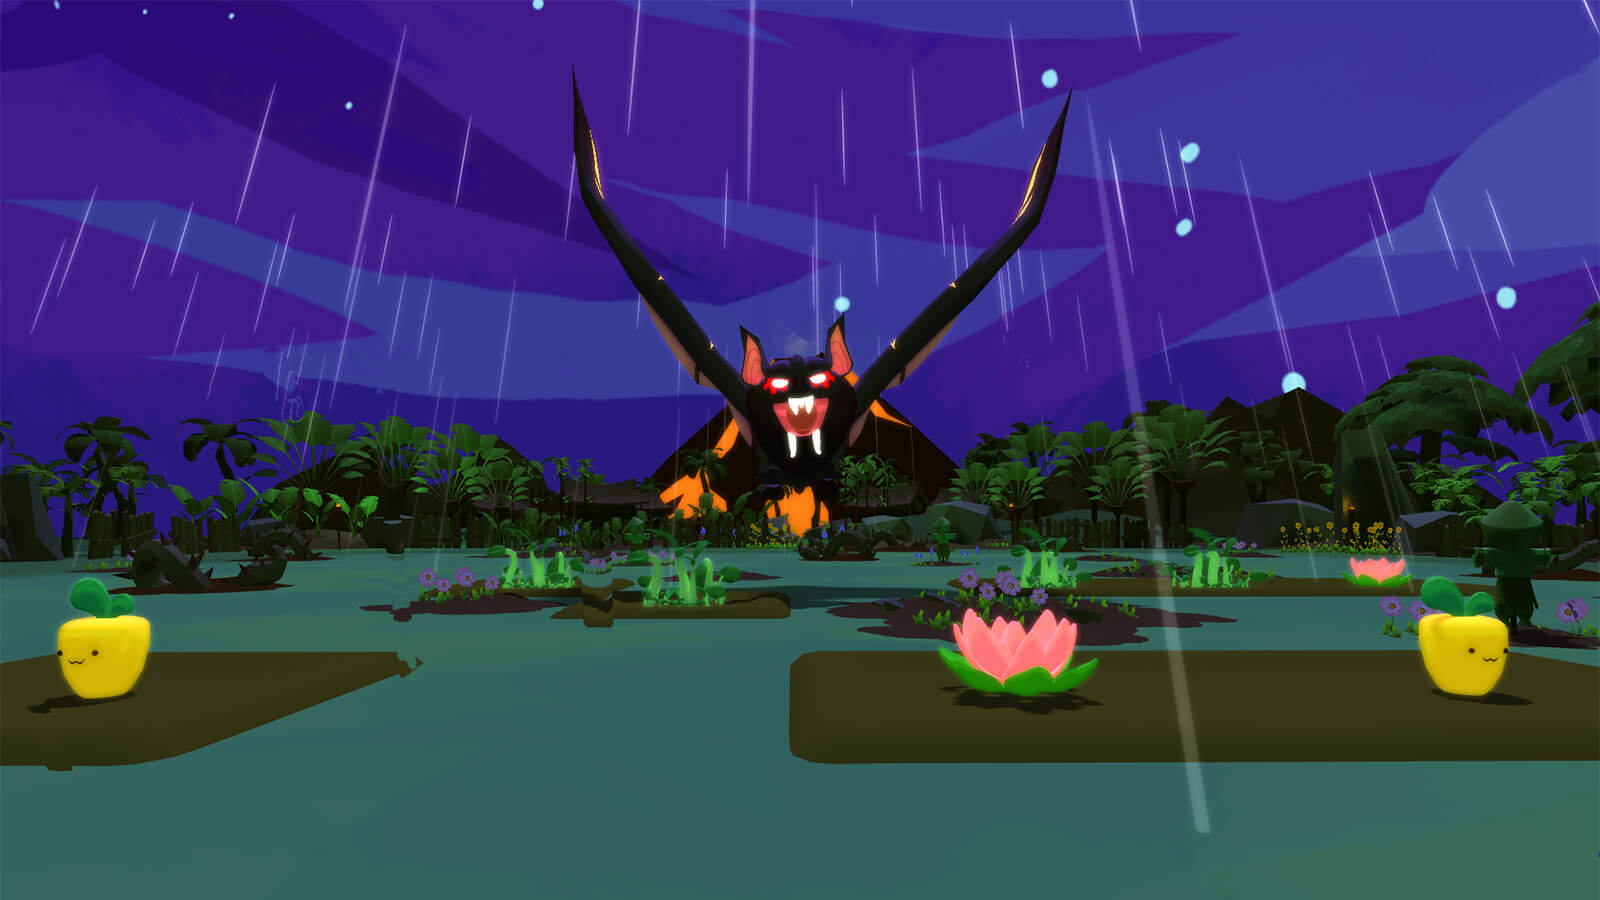 A giant, fanged bat flies through the rainy night sky above a grassy clearing containing several types of planted crops.